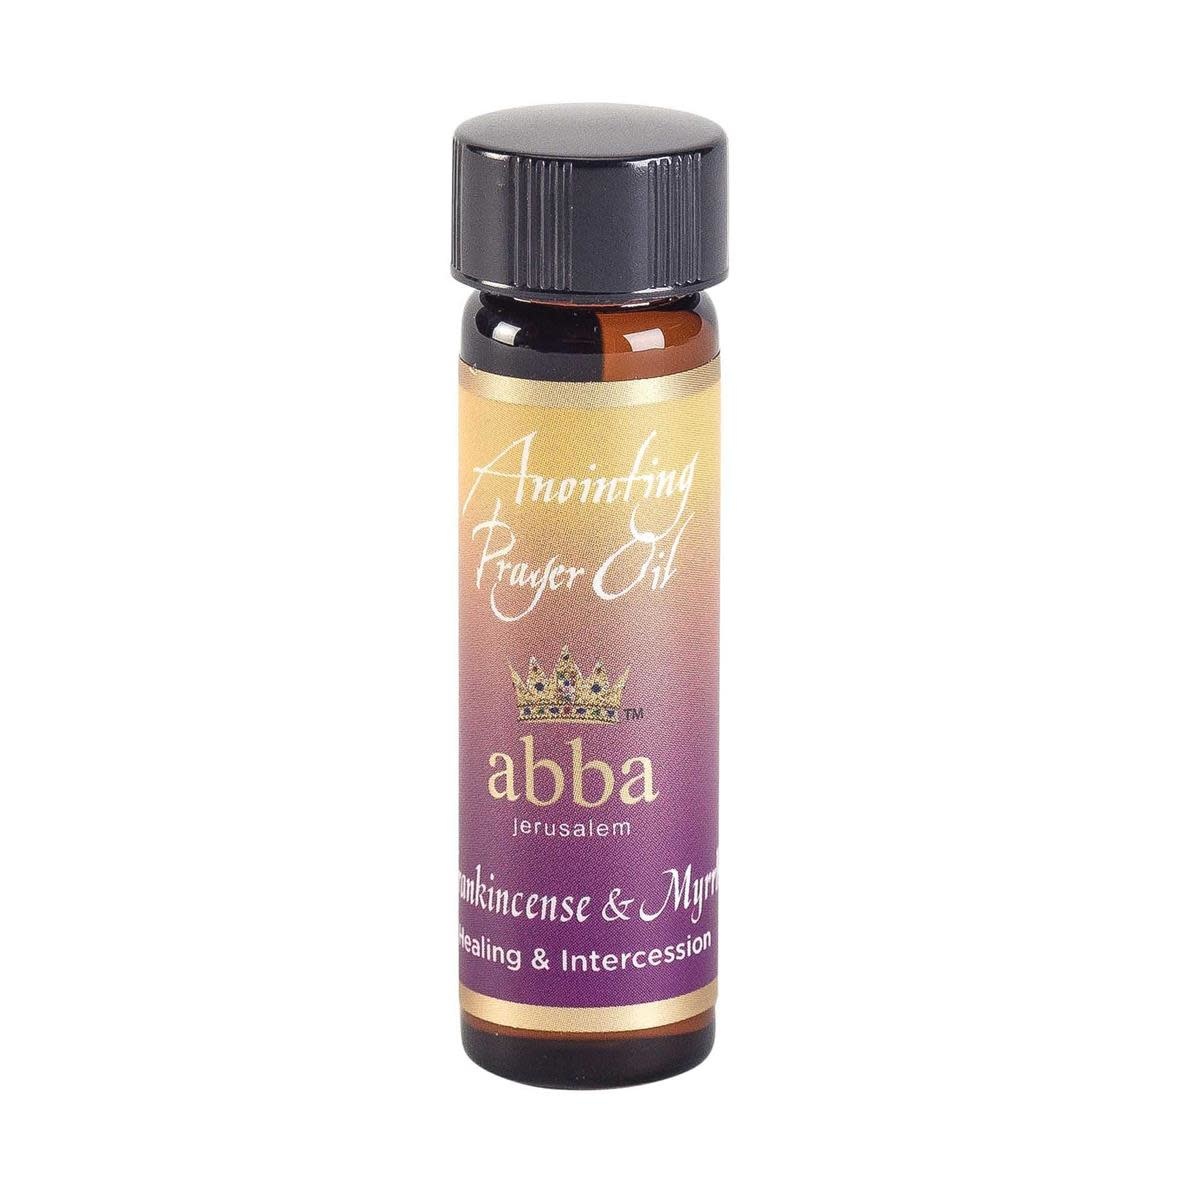 Anointing Oil, Frankincense & Myrrh - Reilly's Church Supply & Gift Boutique